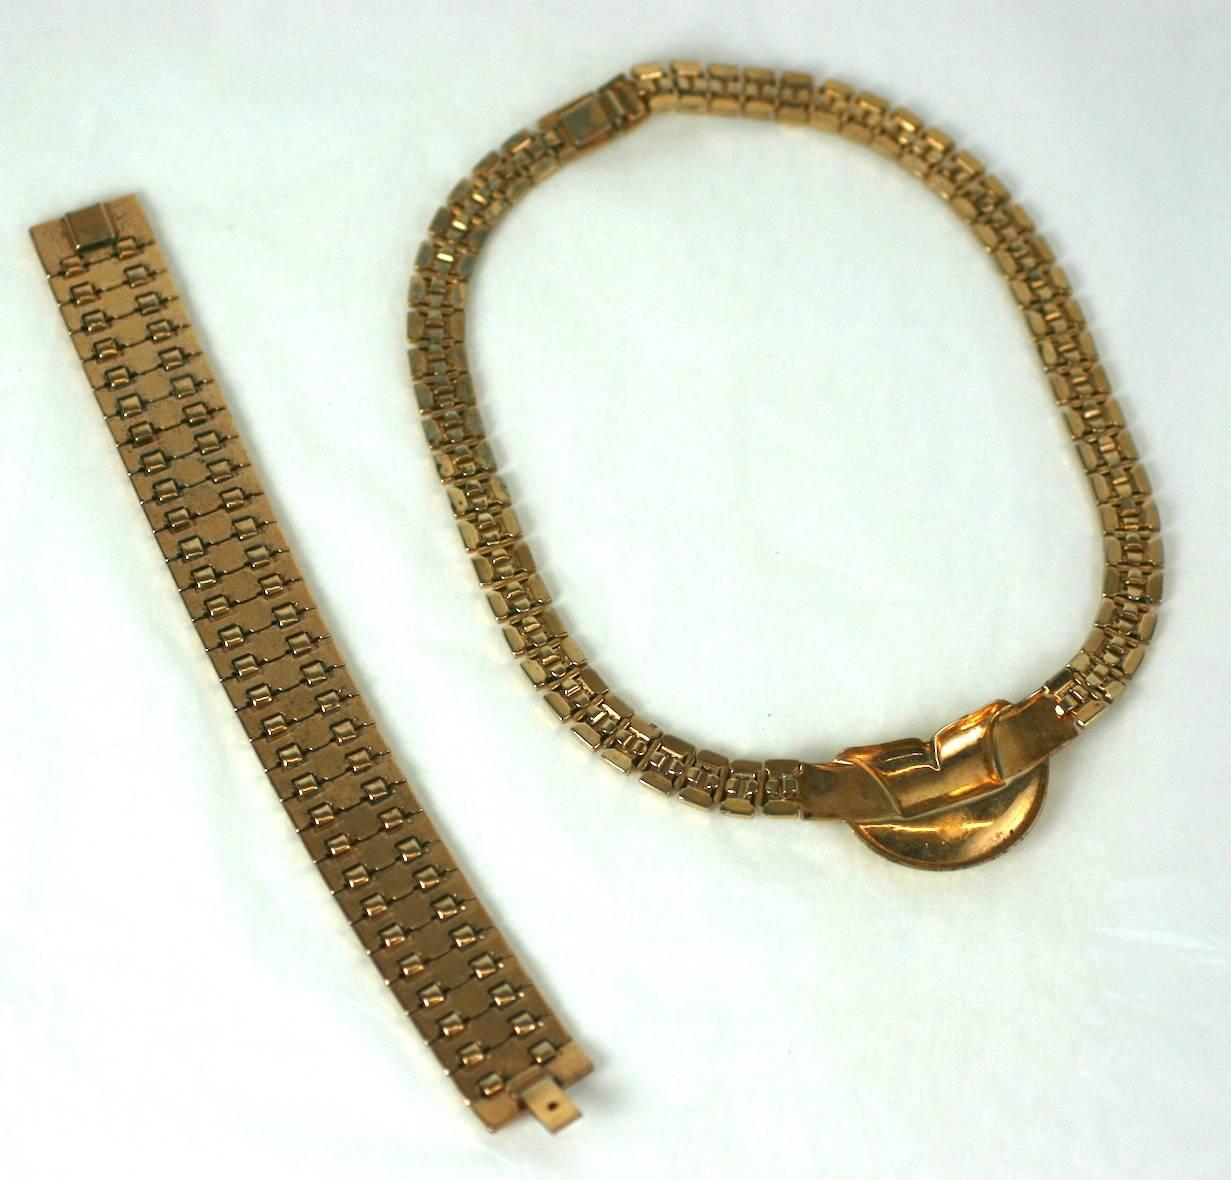 Attractive Trifari gilt suite with Retro link necklace and bracelet in the style of Van Cleef, from the 1940's USA. Excellent Condition.
Length 15.50